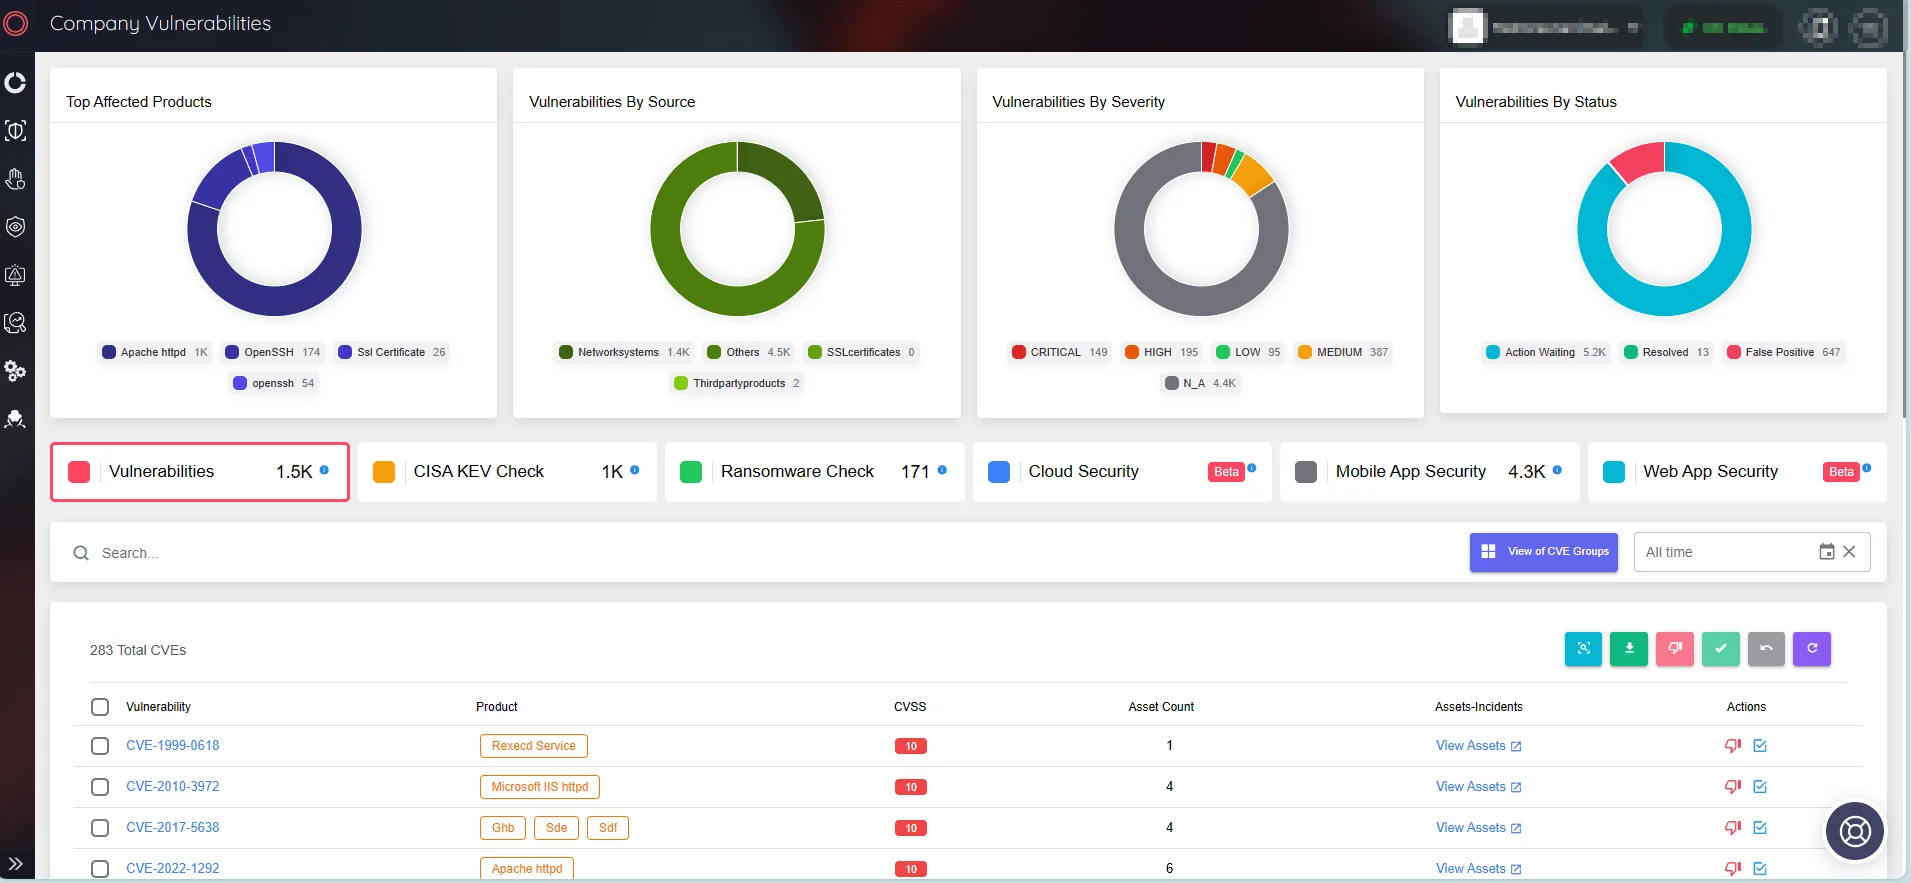 View company vulnerabilities through SOCRadar’s ASM. You can access further details on any identified vulnerability through the Vulnerability Intelligence module.